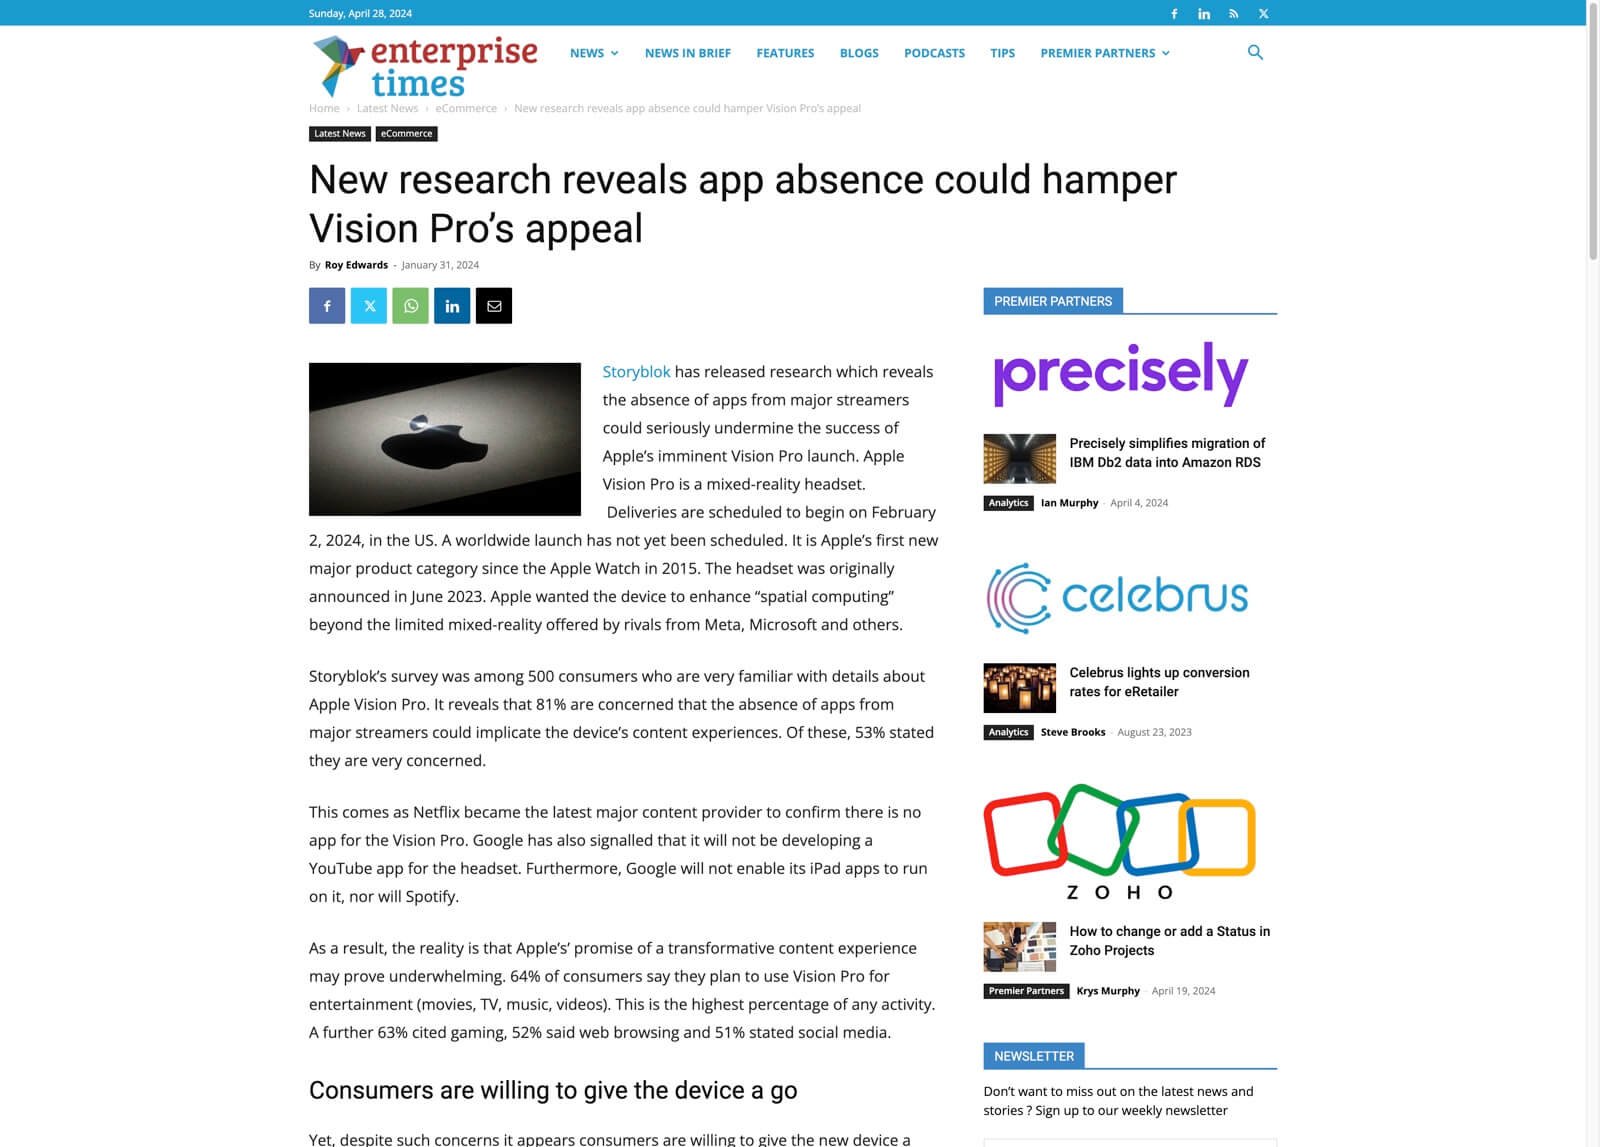 Enterprise-times-New-research-reveals-app-absence-could-hamper-Vision-Pro-s-appeal-.jpg